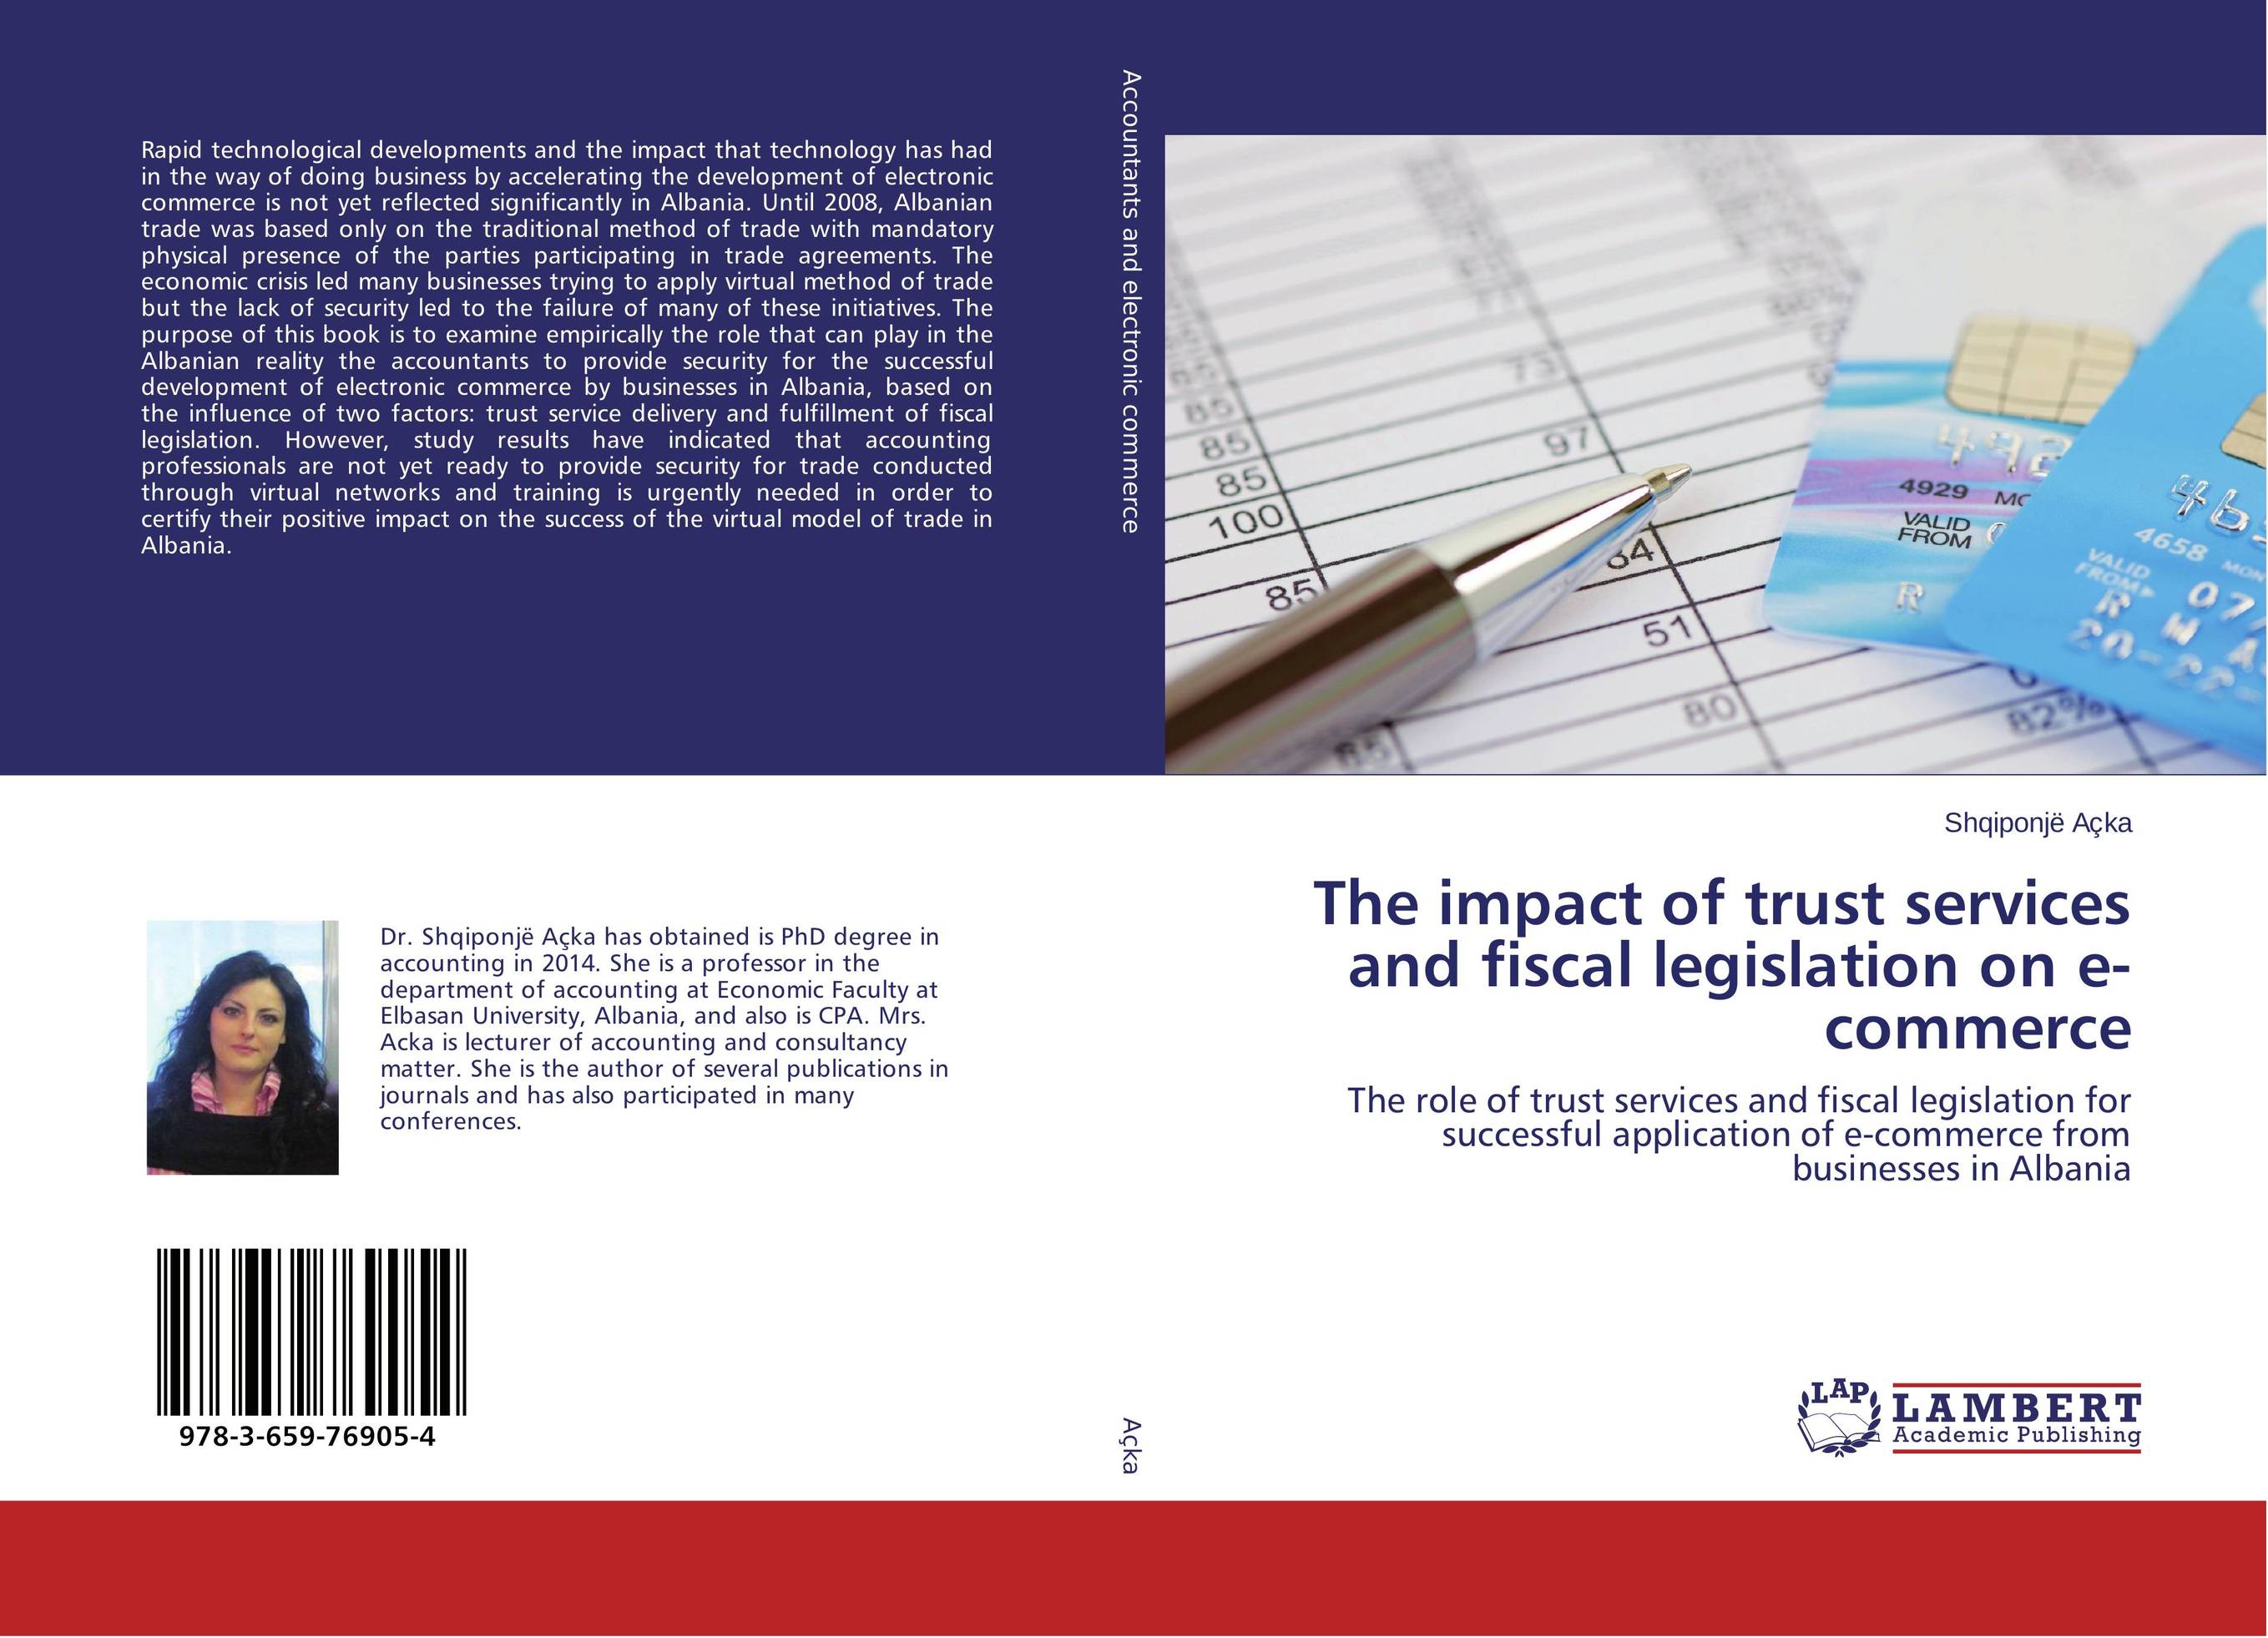 The impact of trust services and fiscal legislation on e-commerce